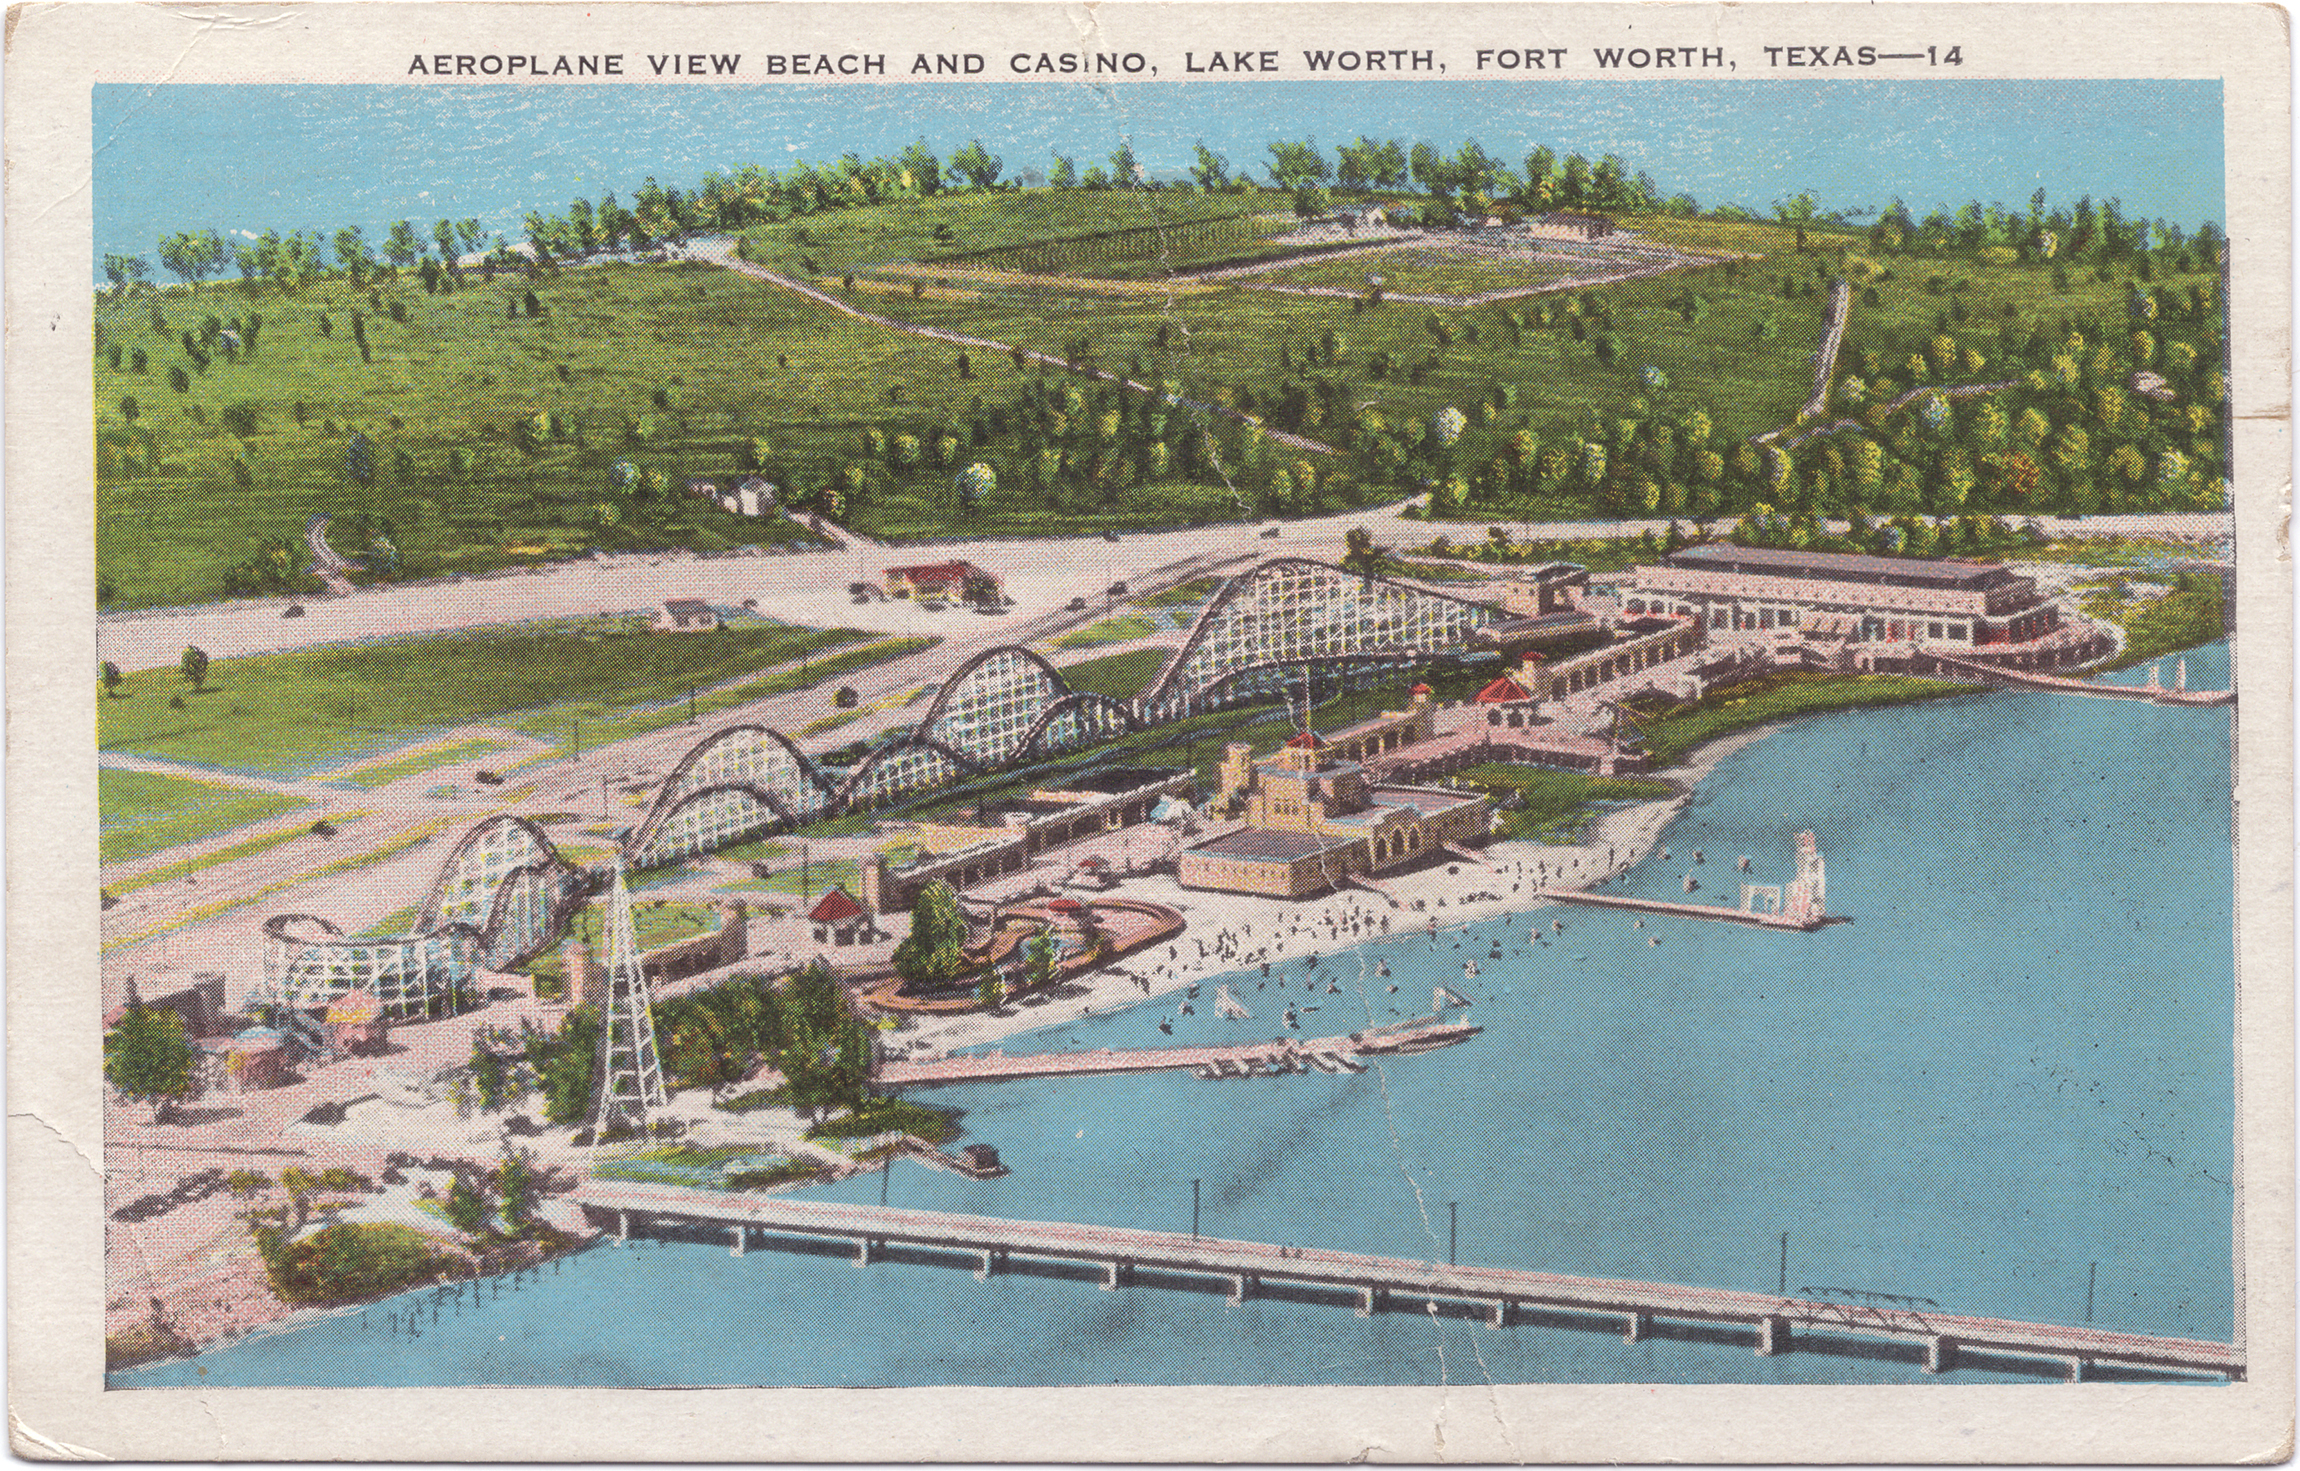 The postcard features a drawing of an aerial view of the casino and a large rollercoaster with the lake in front of it and a field behind it.